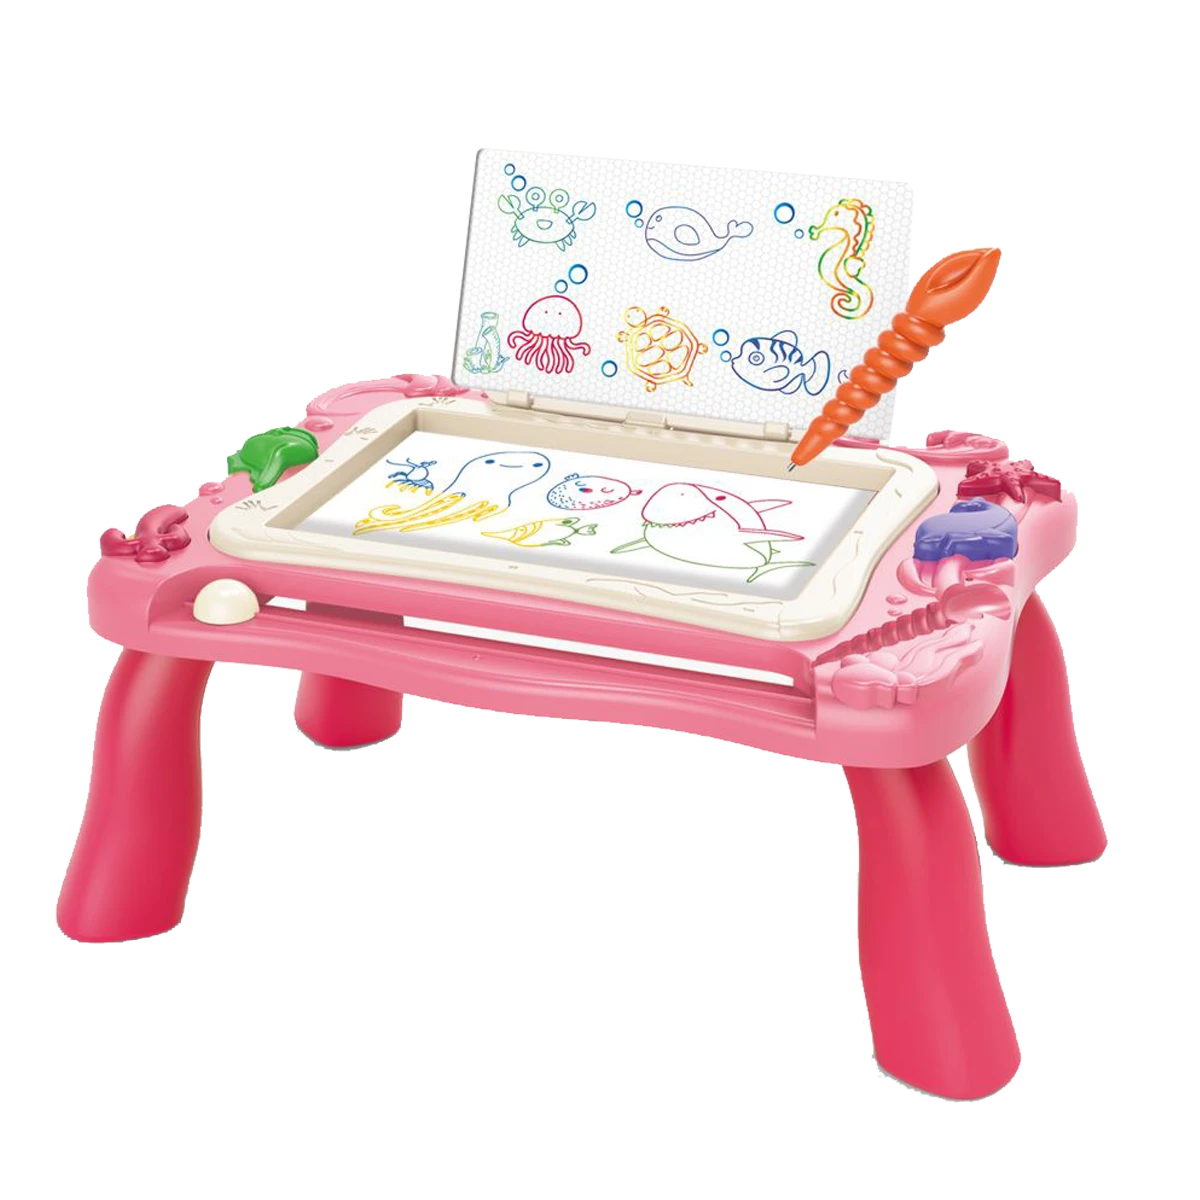 new toys family interactive 2 in 1 color palette playgame with various accessories